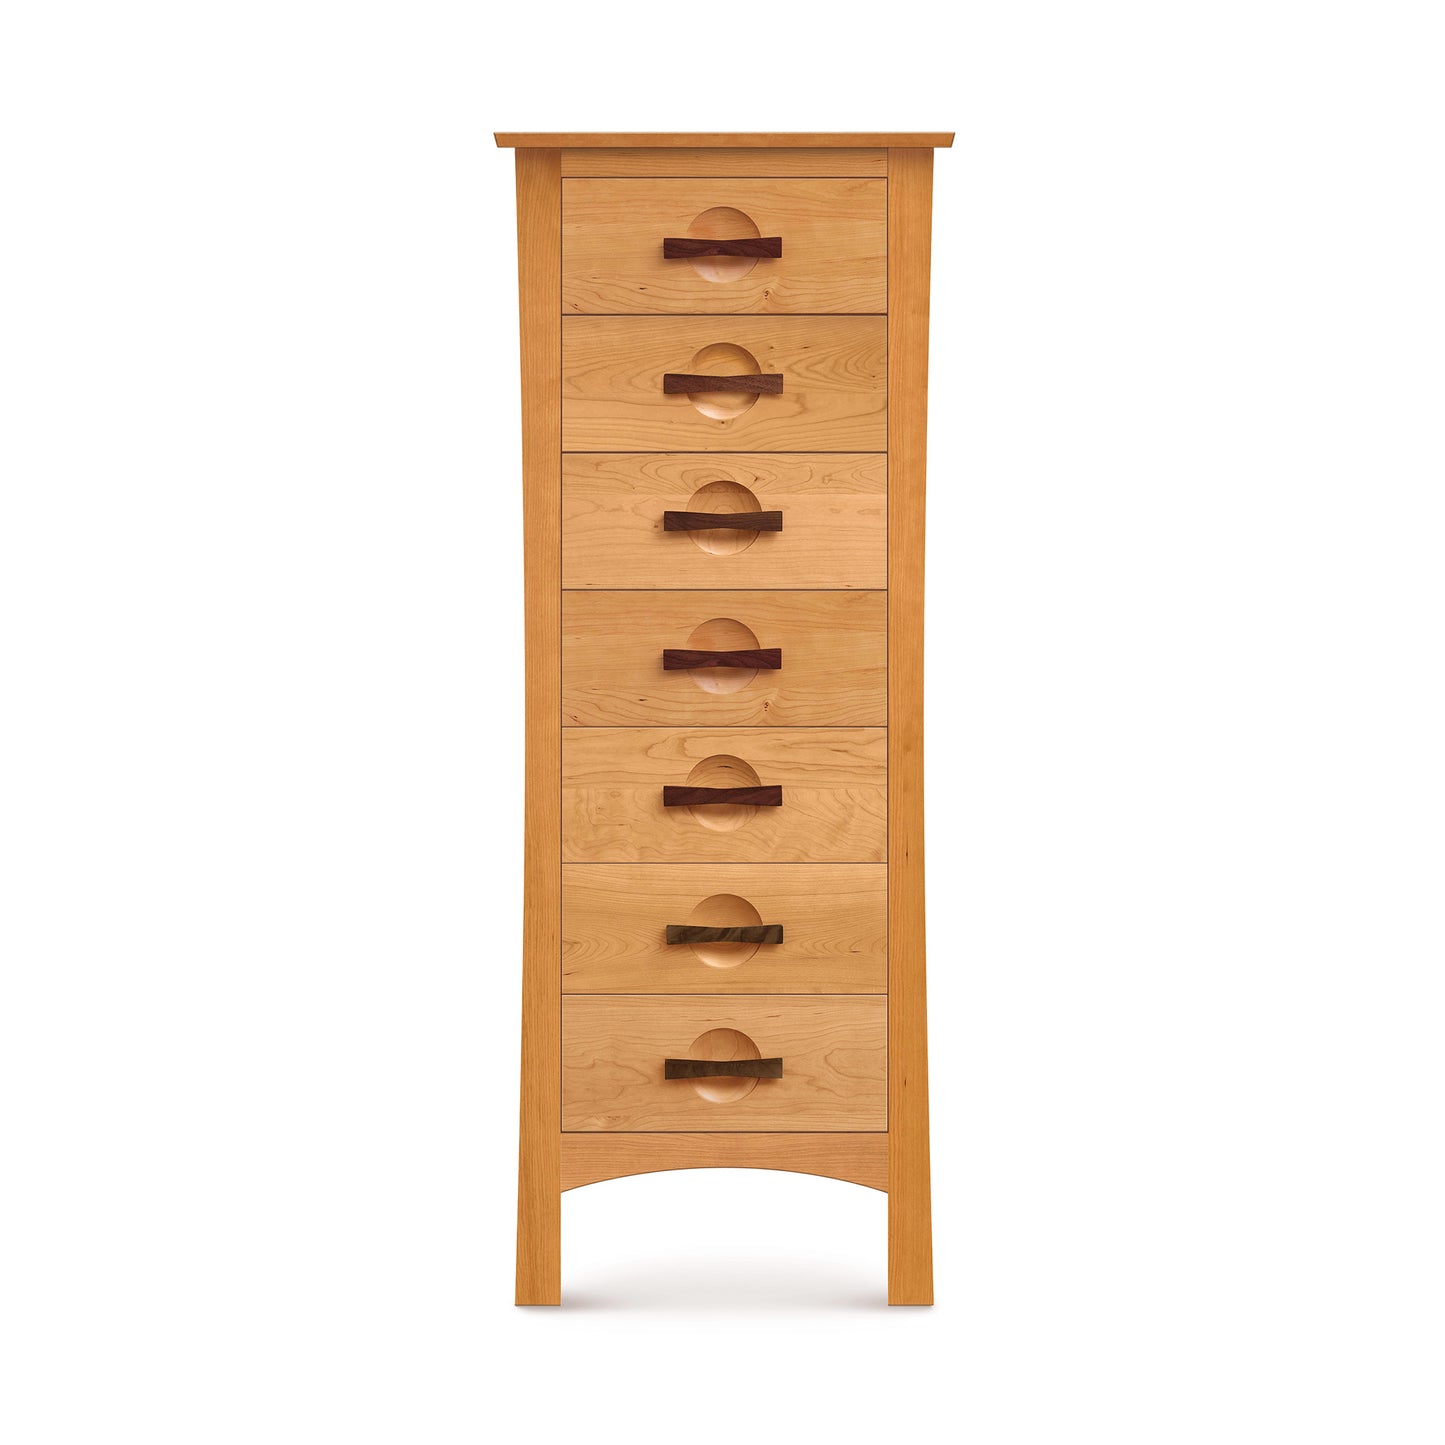 A tall, narrow wooden Copeland Furniture Berkeley 7-Drawer Lingerie Chest with seven drawers, each featuring a half-moon shaped handle, against a white background.